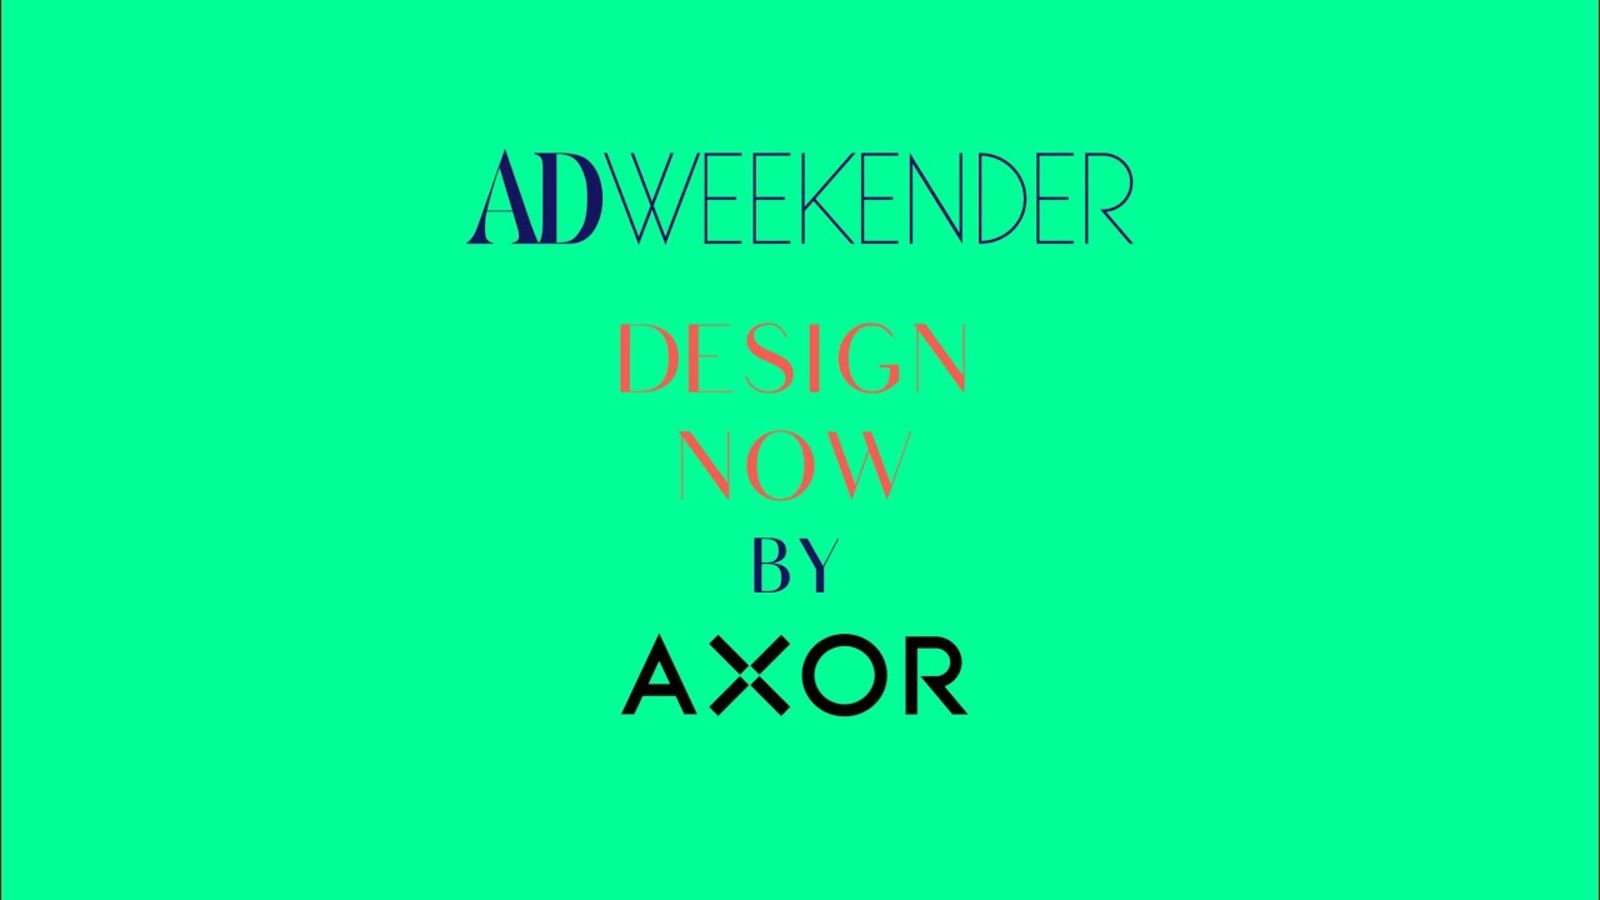 AD Weekender - Design Now by Axor